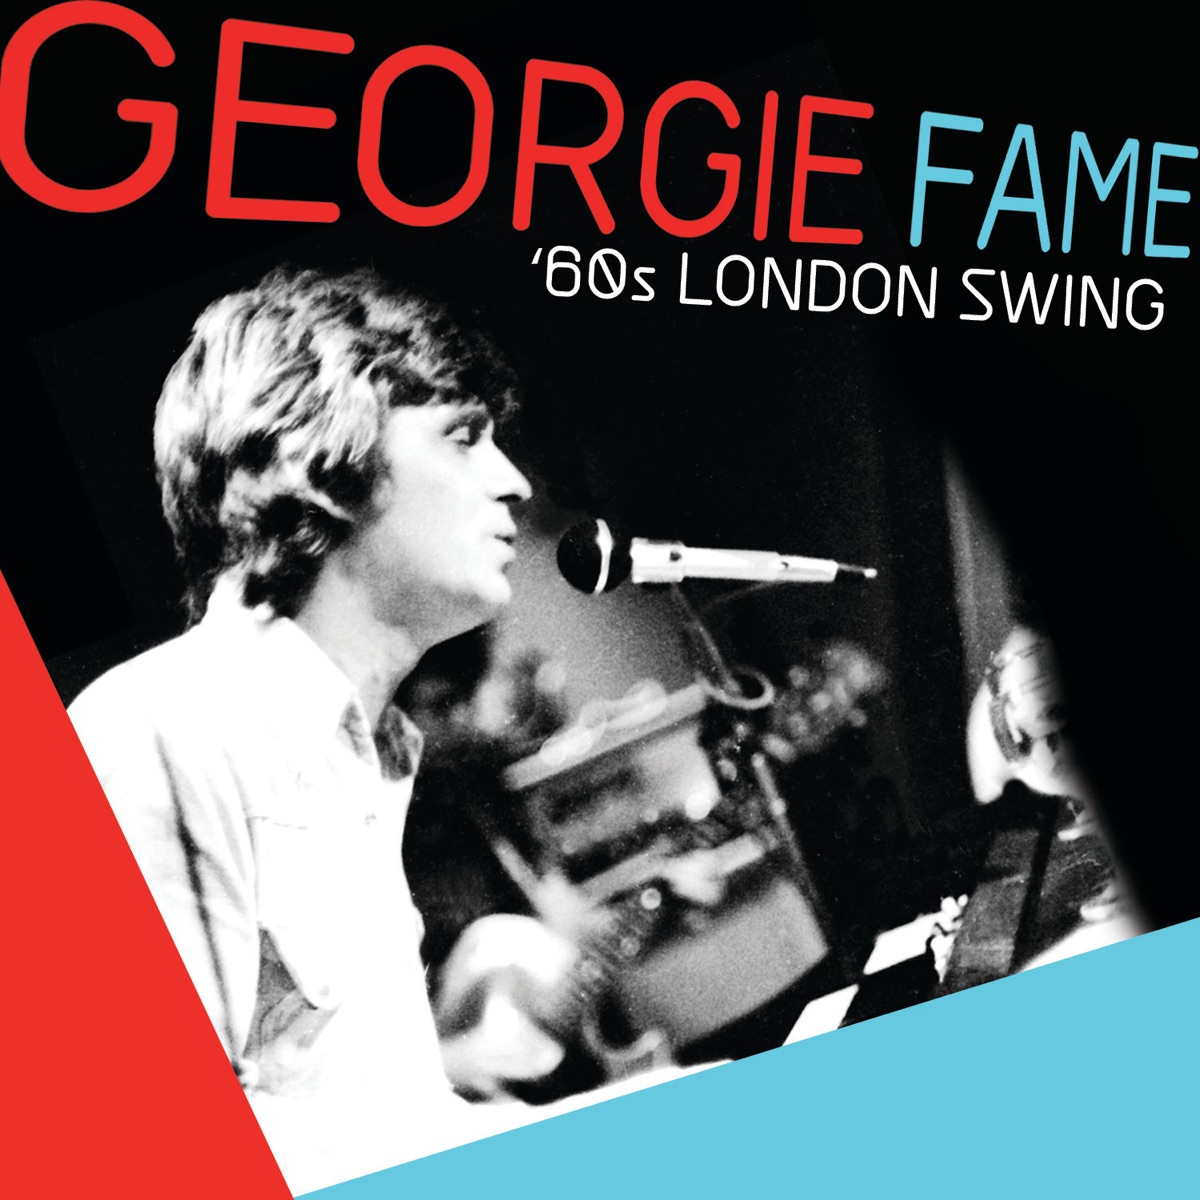 Fame At Last - Album by Georgie Fame - Apple Music